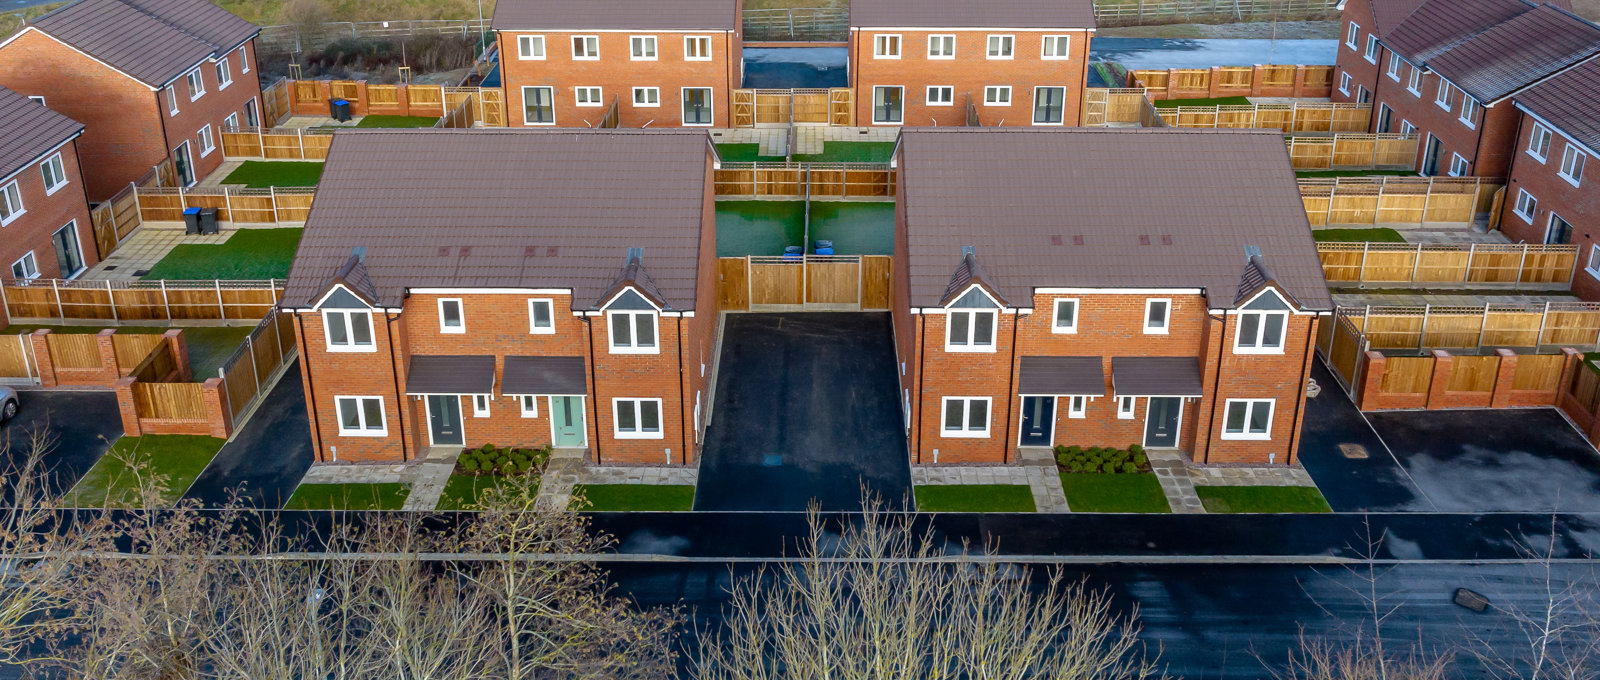 Aerial view of a small modern housing development on what looks like a cold day